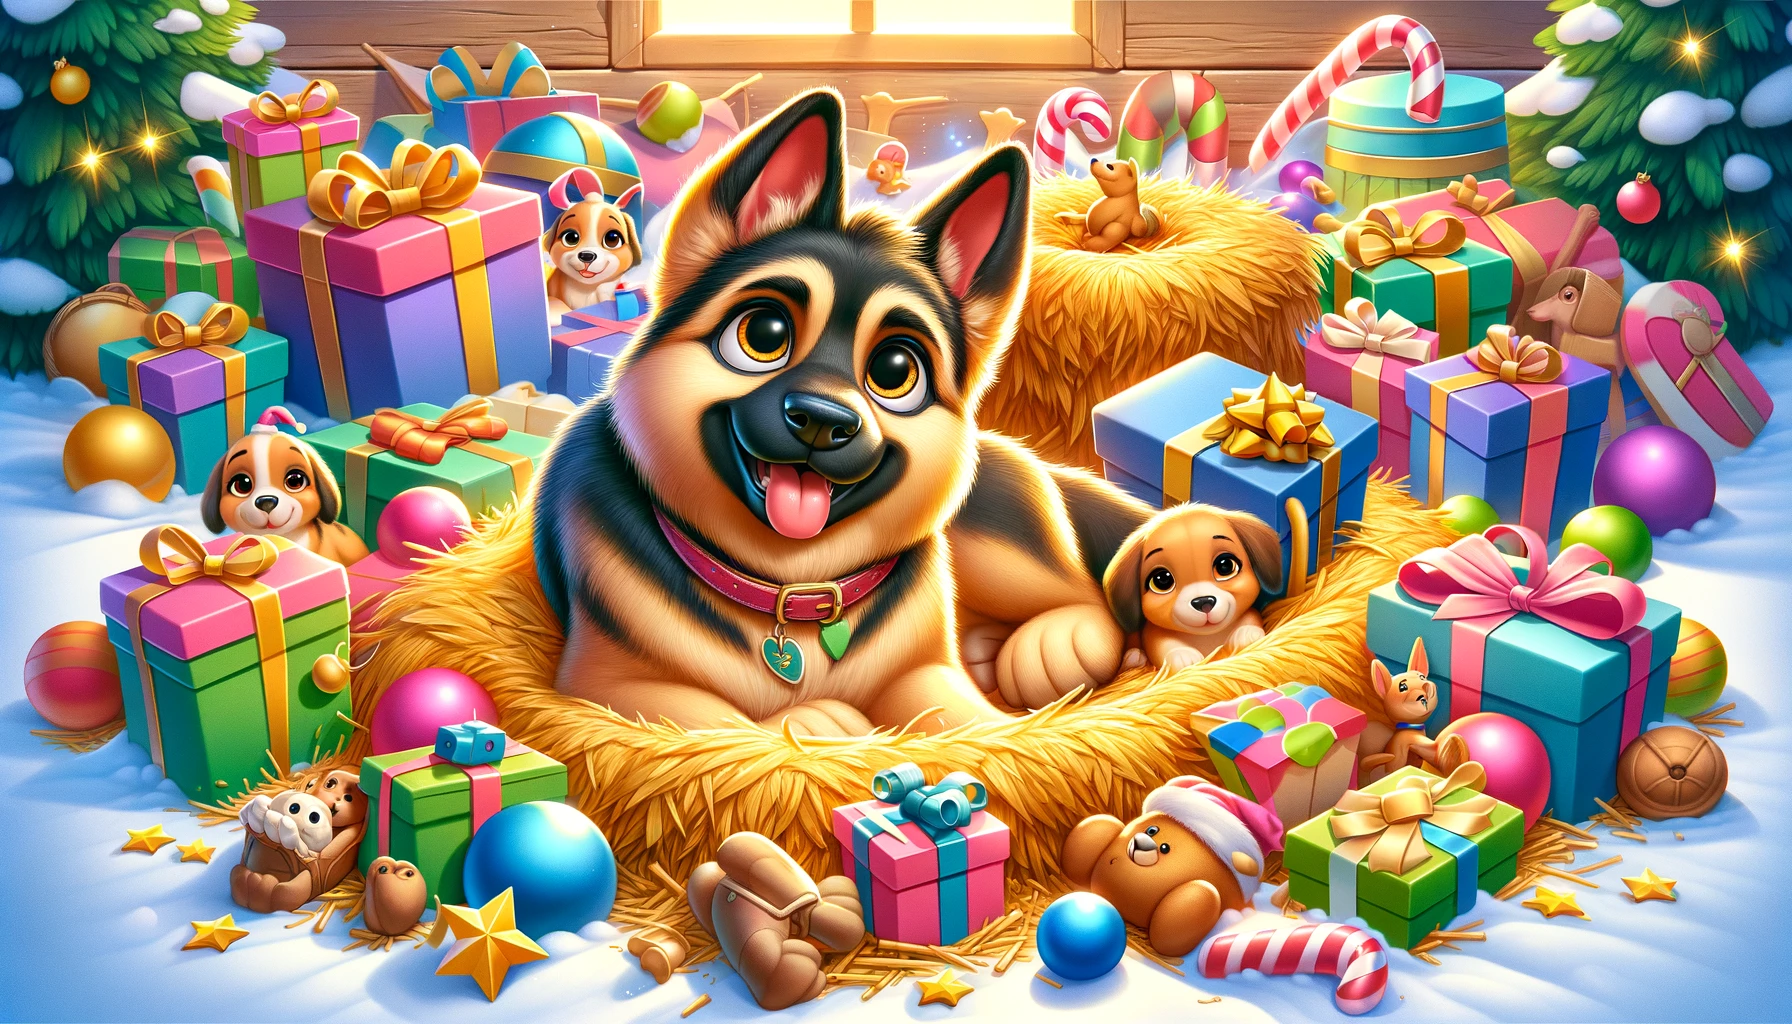 A dog in the manger, a cute German Shepherd surrounded by colorful toys and treats, capturing a cheerful animation scene.